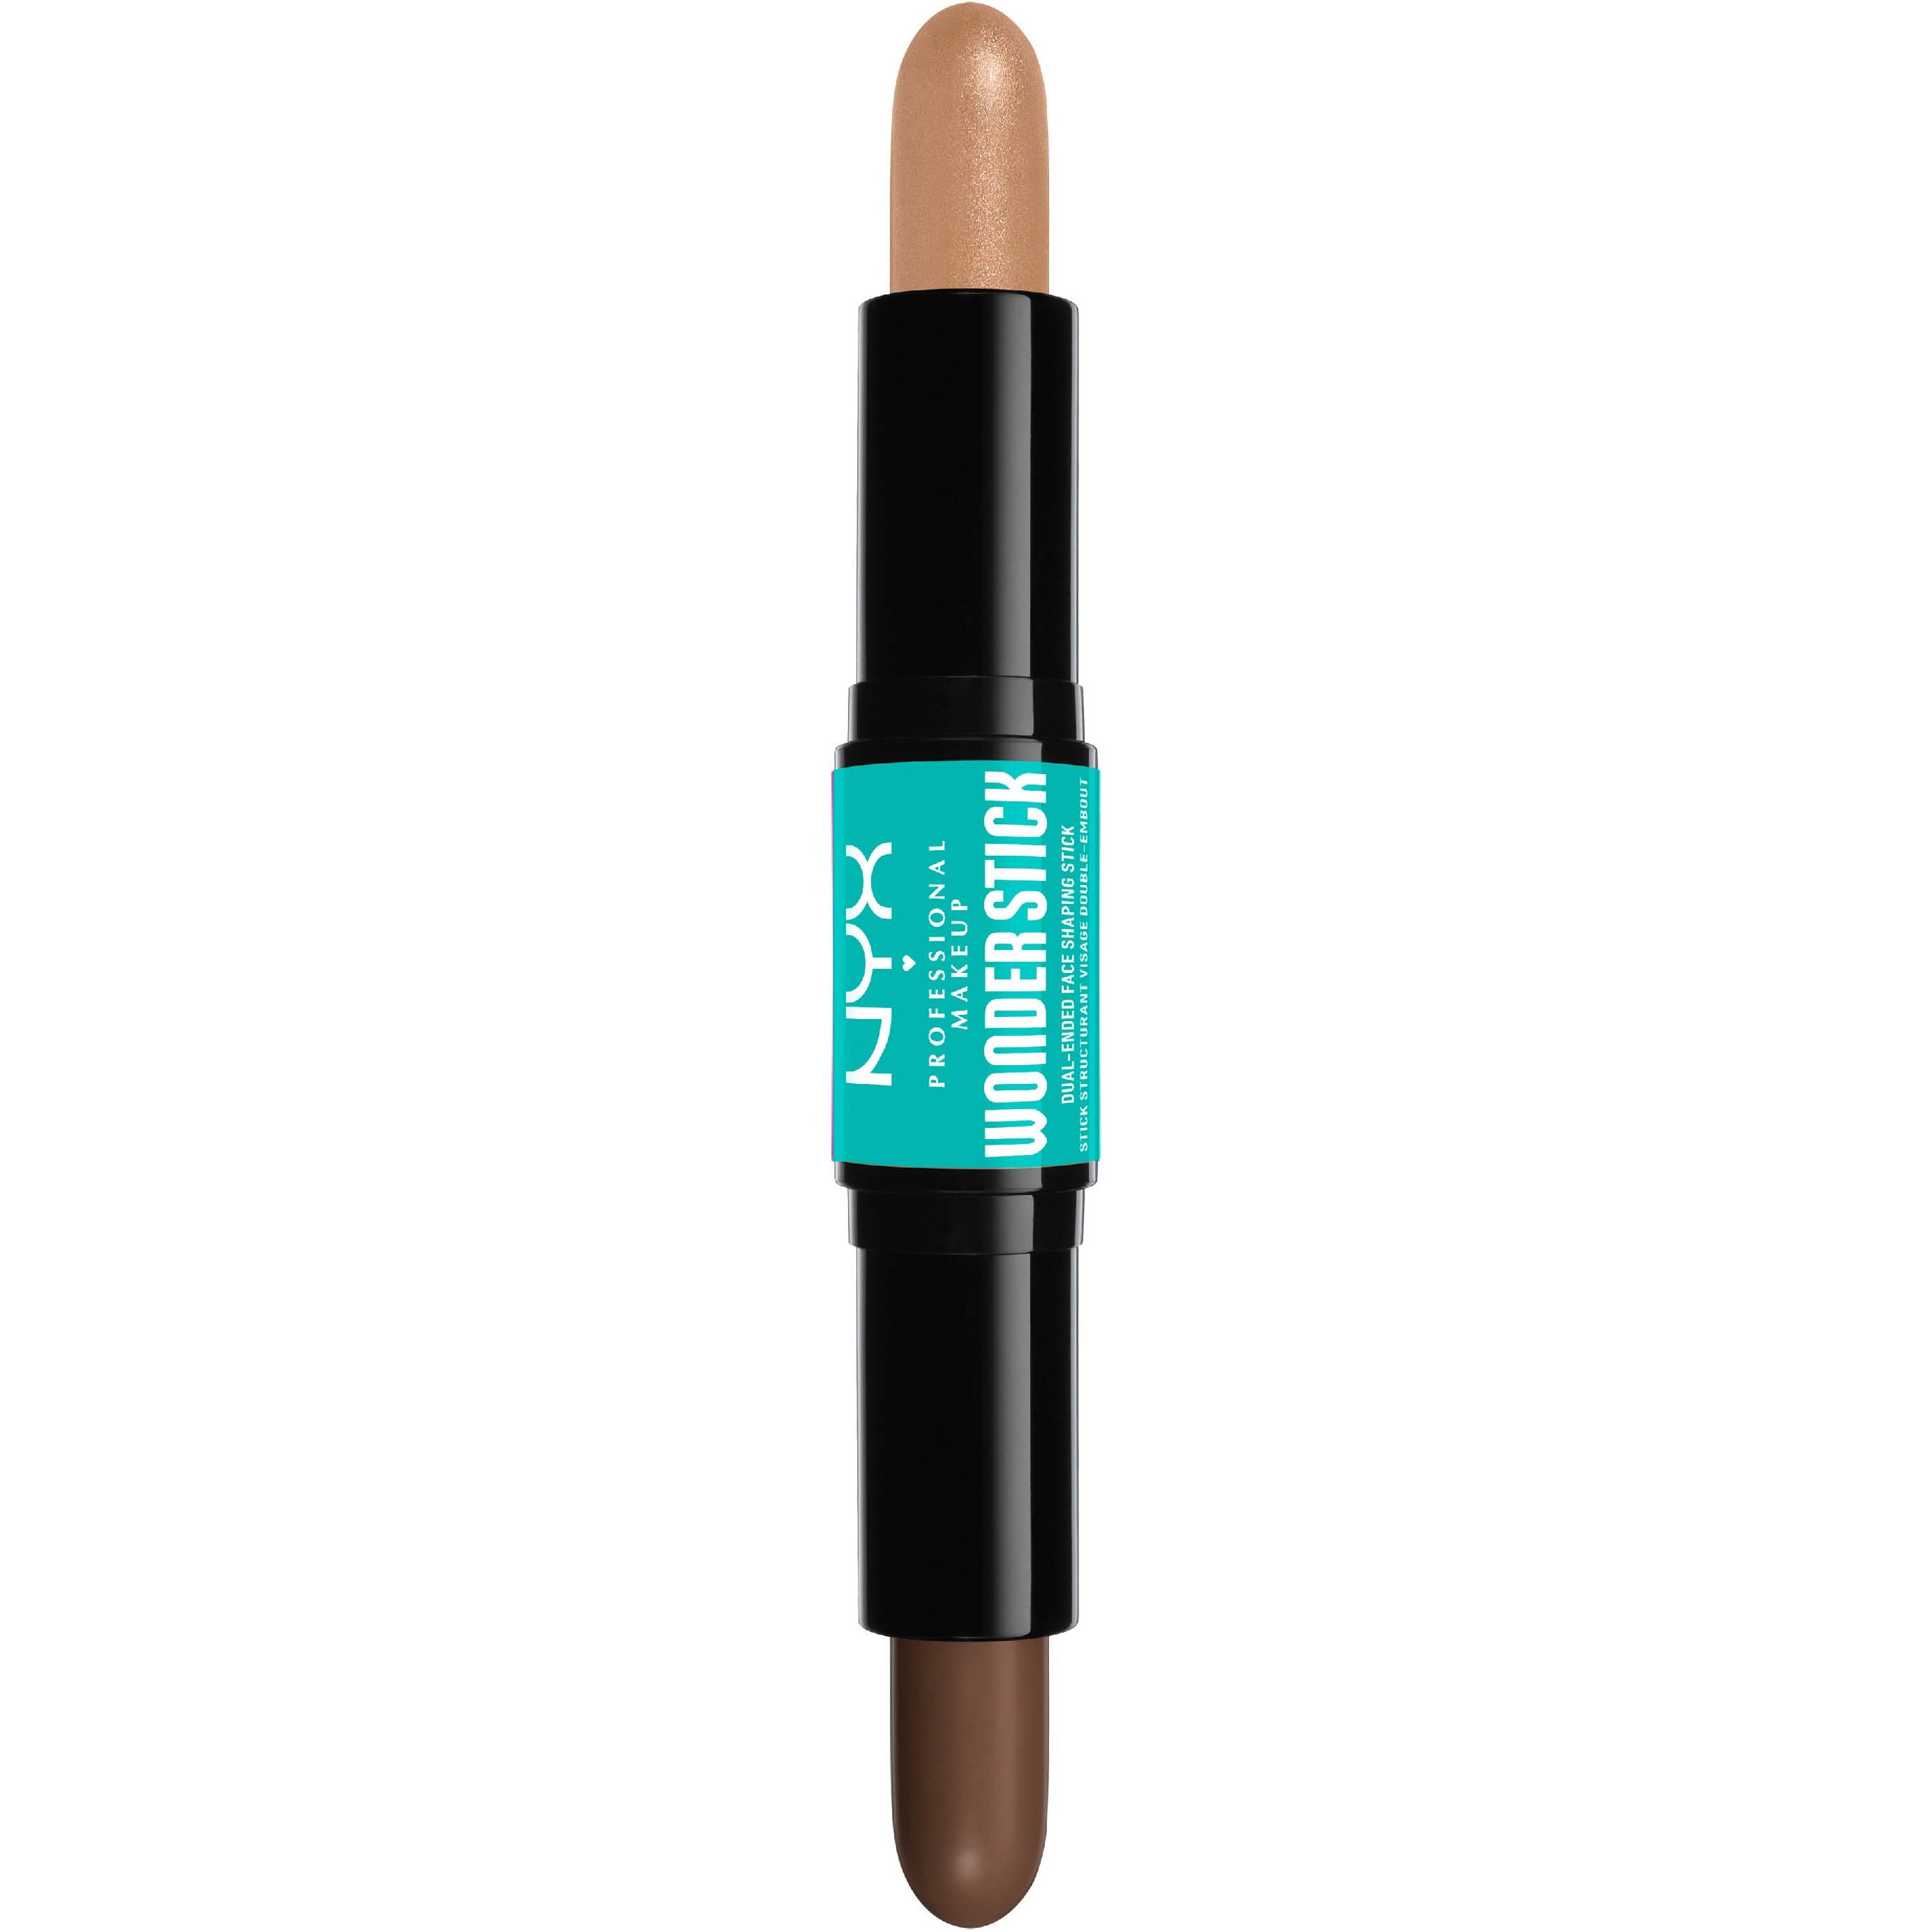 Läs mer om NYX PROFESSIONAL MAKEUP Wonder Stick Dual-Ended Face Shaping Stick 05